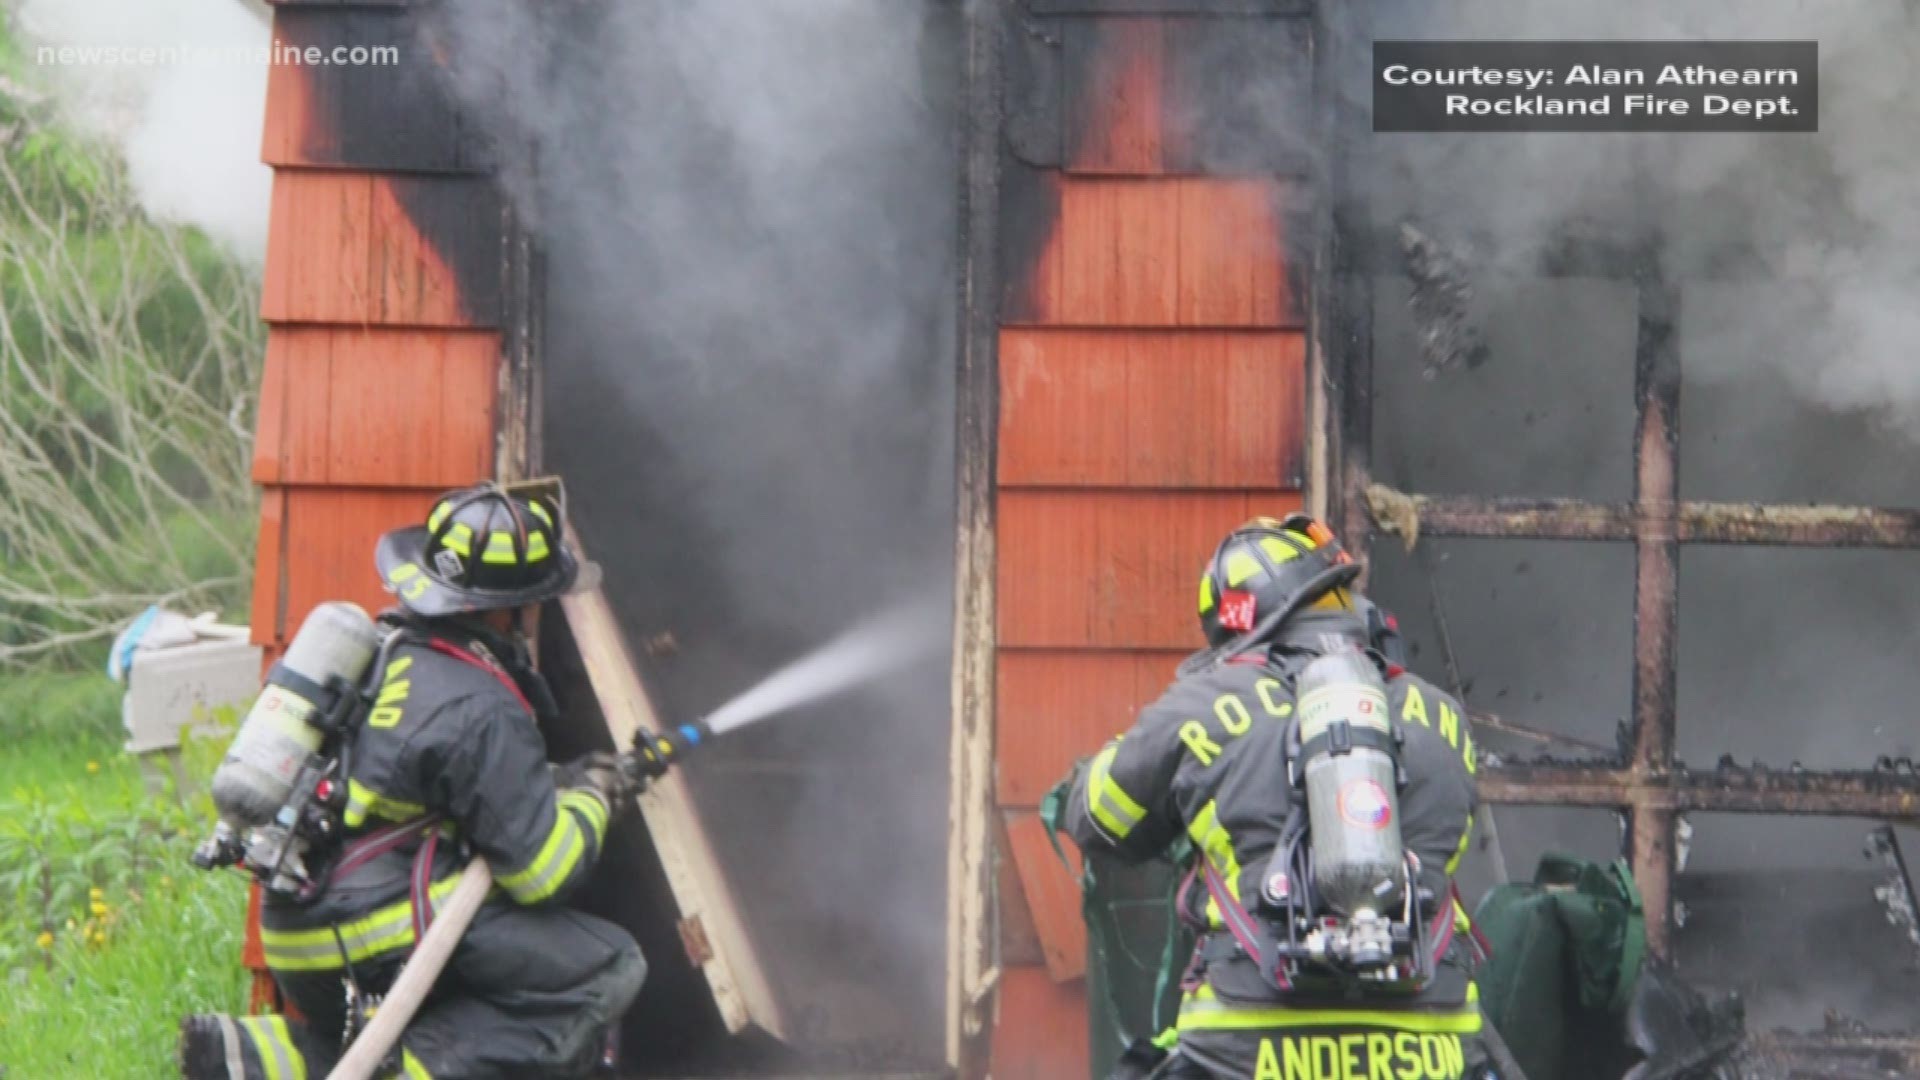 Health officials say male firefighters have a higher rate of testicular and prostate cancers, while female firefighters have a higher rate of breast cancer.